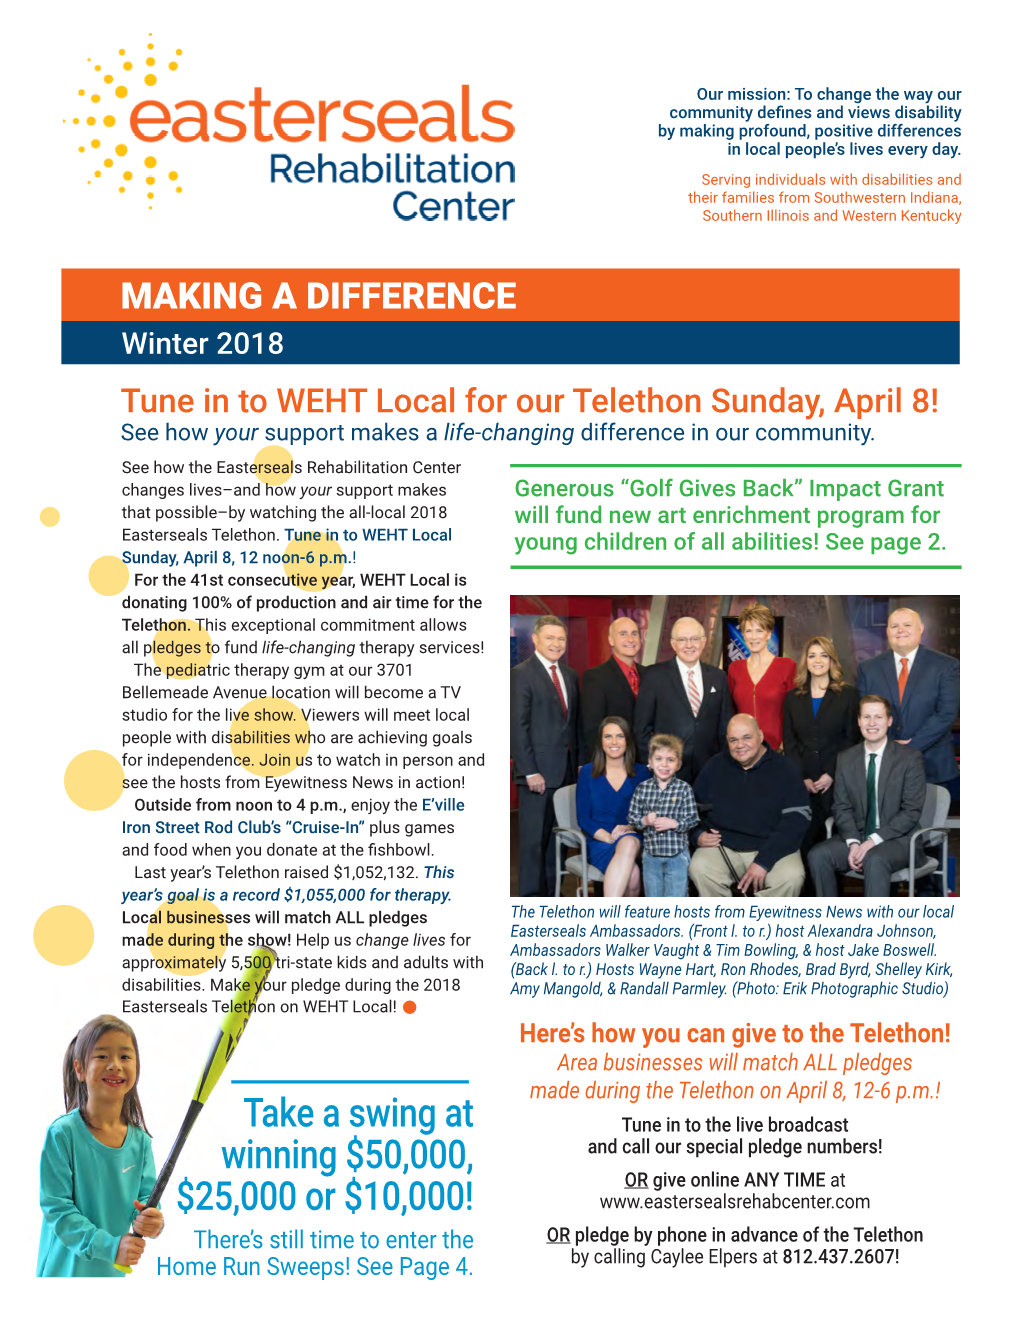 Winter 2018 Tune in to WEHT Local for Our Telethon Sunday, April 8! See How Your Support Makes a Life-Changing Difference in Our Community